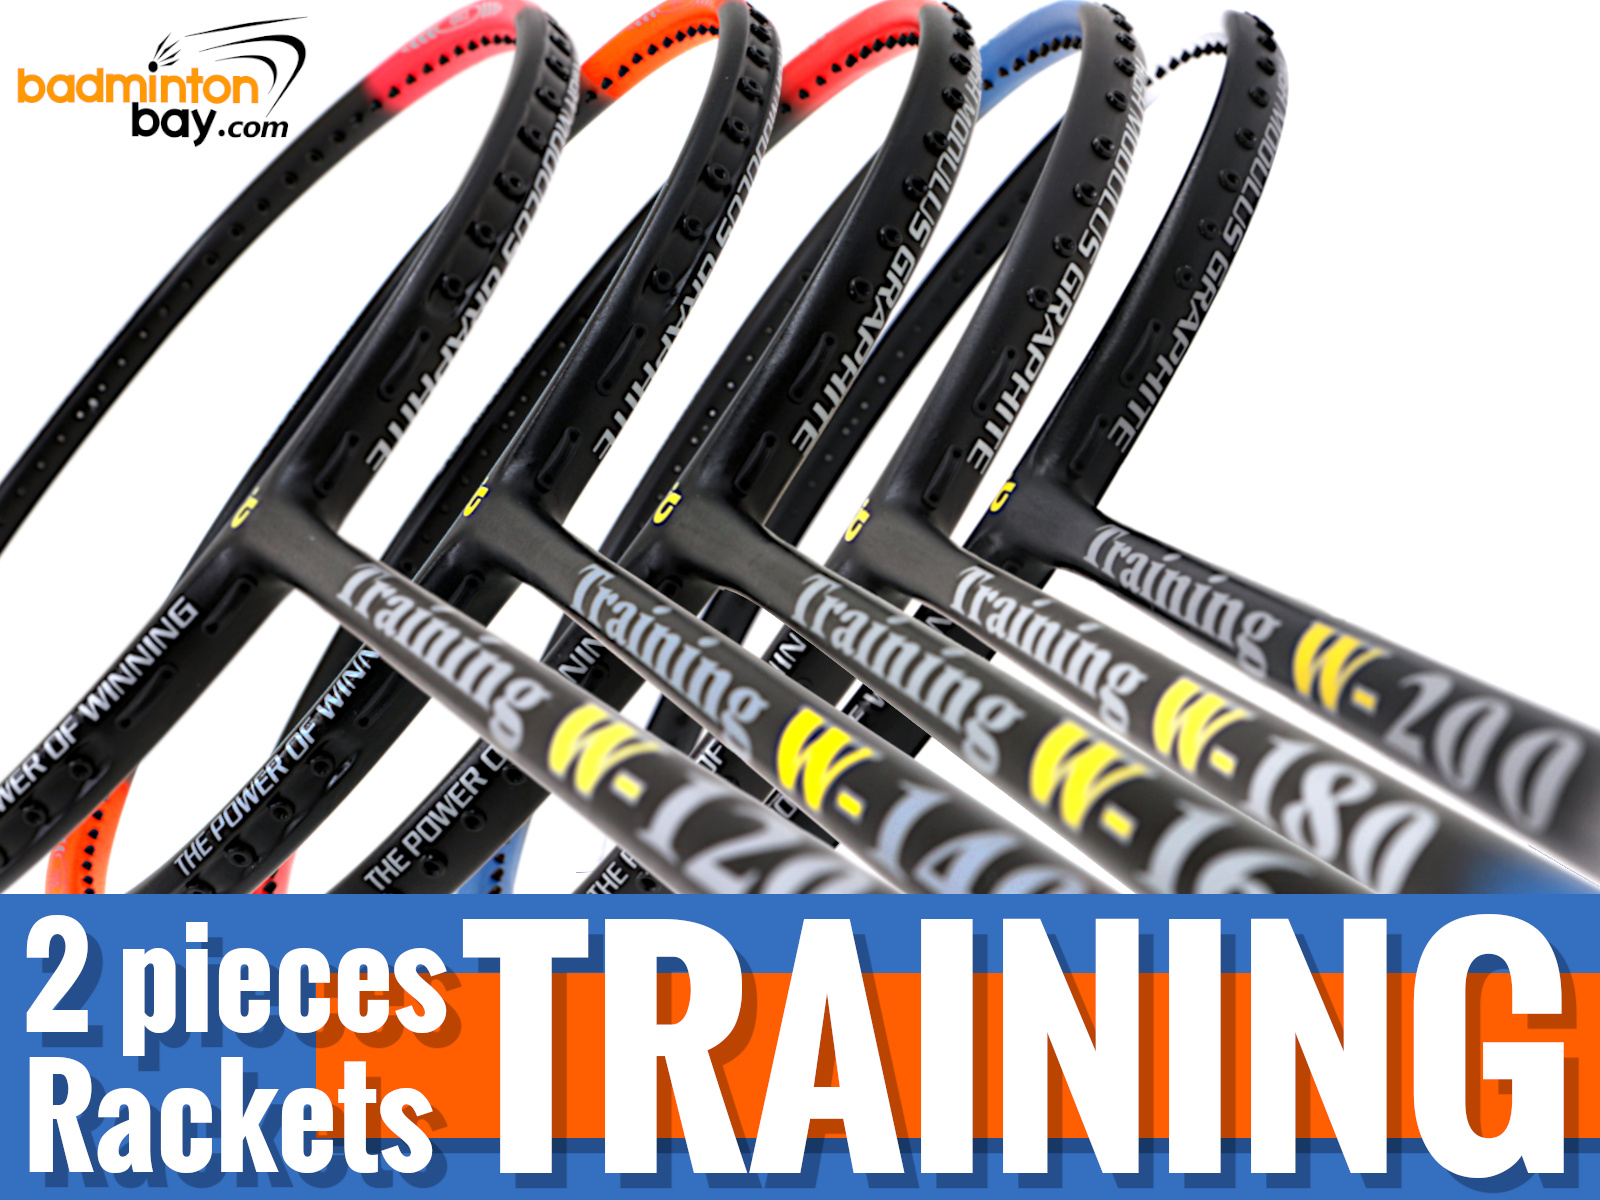 2 Pieces training rackets